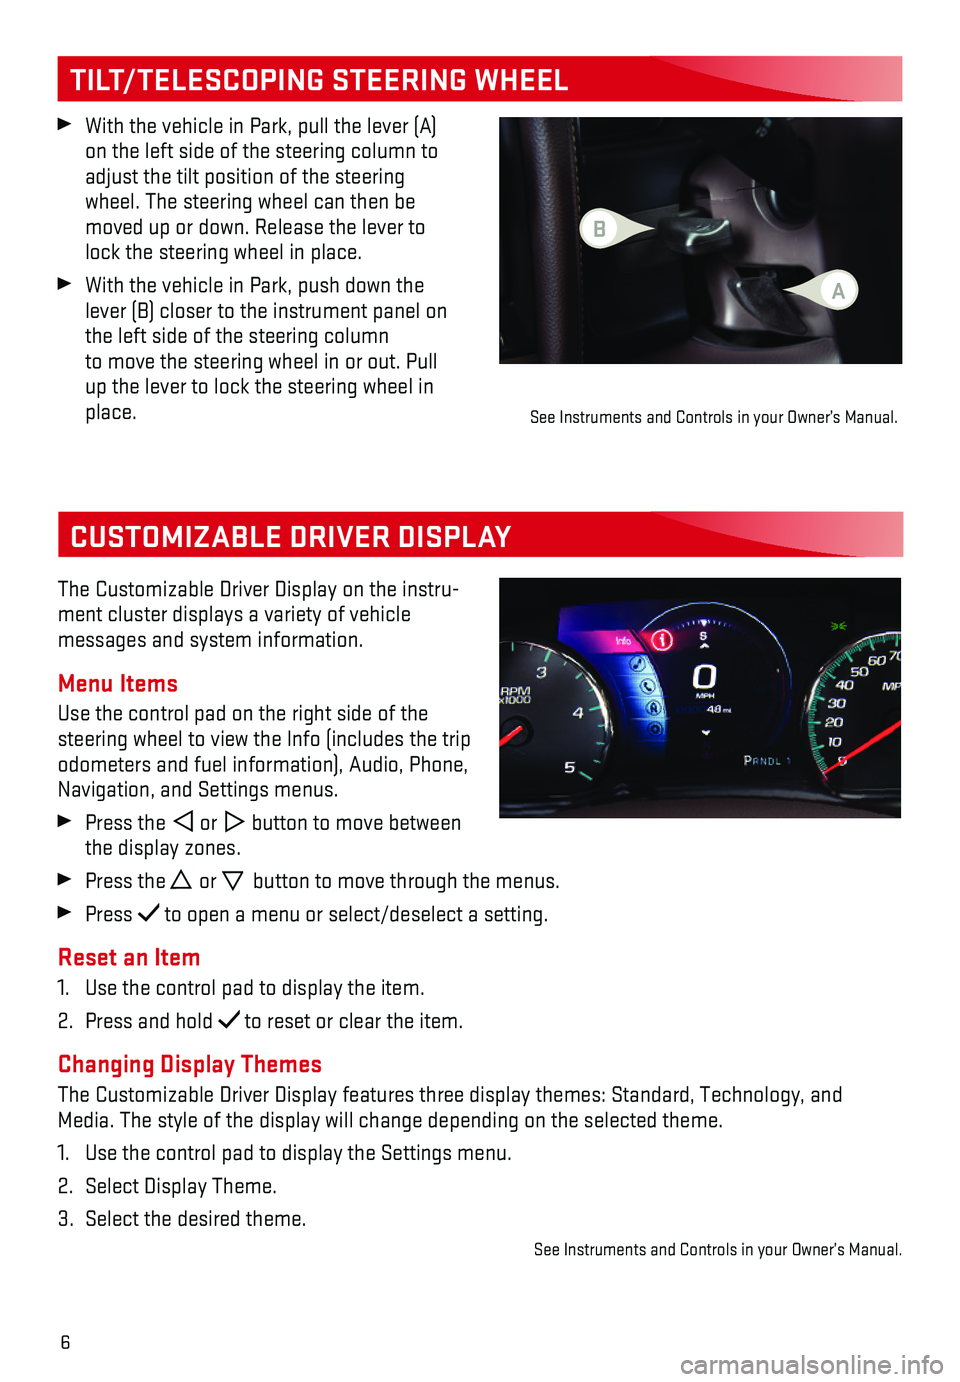 GMC SIERRA 2018  Get To Know Guide 6
CUSTOMIZABLE DRIVER DISPLAY
The Customizable Driver Display on the instru-ment cluster displays a variety of vehicle  
messages and system information.
Menu Items
Use the control pad on the right si